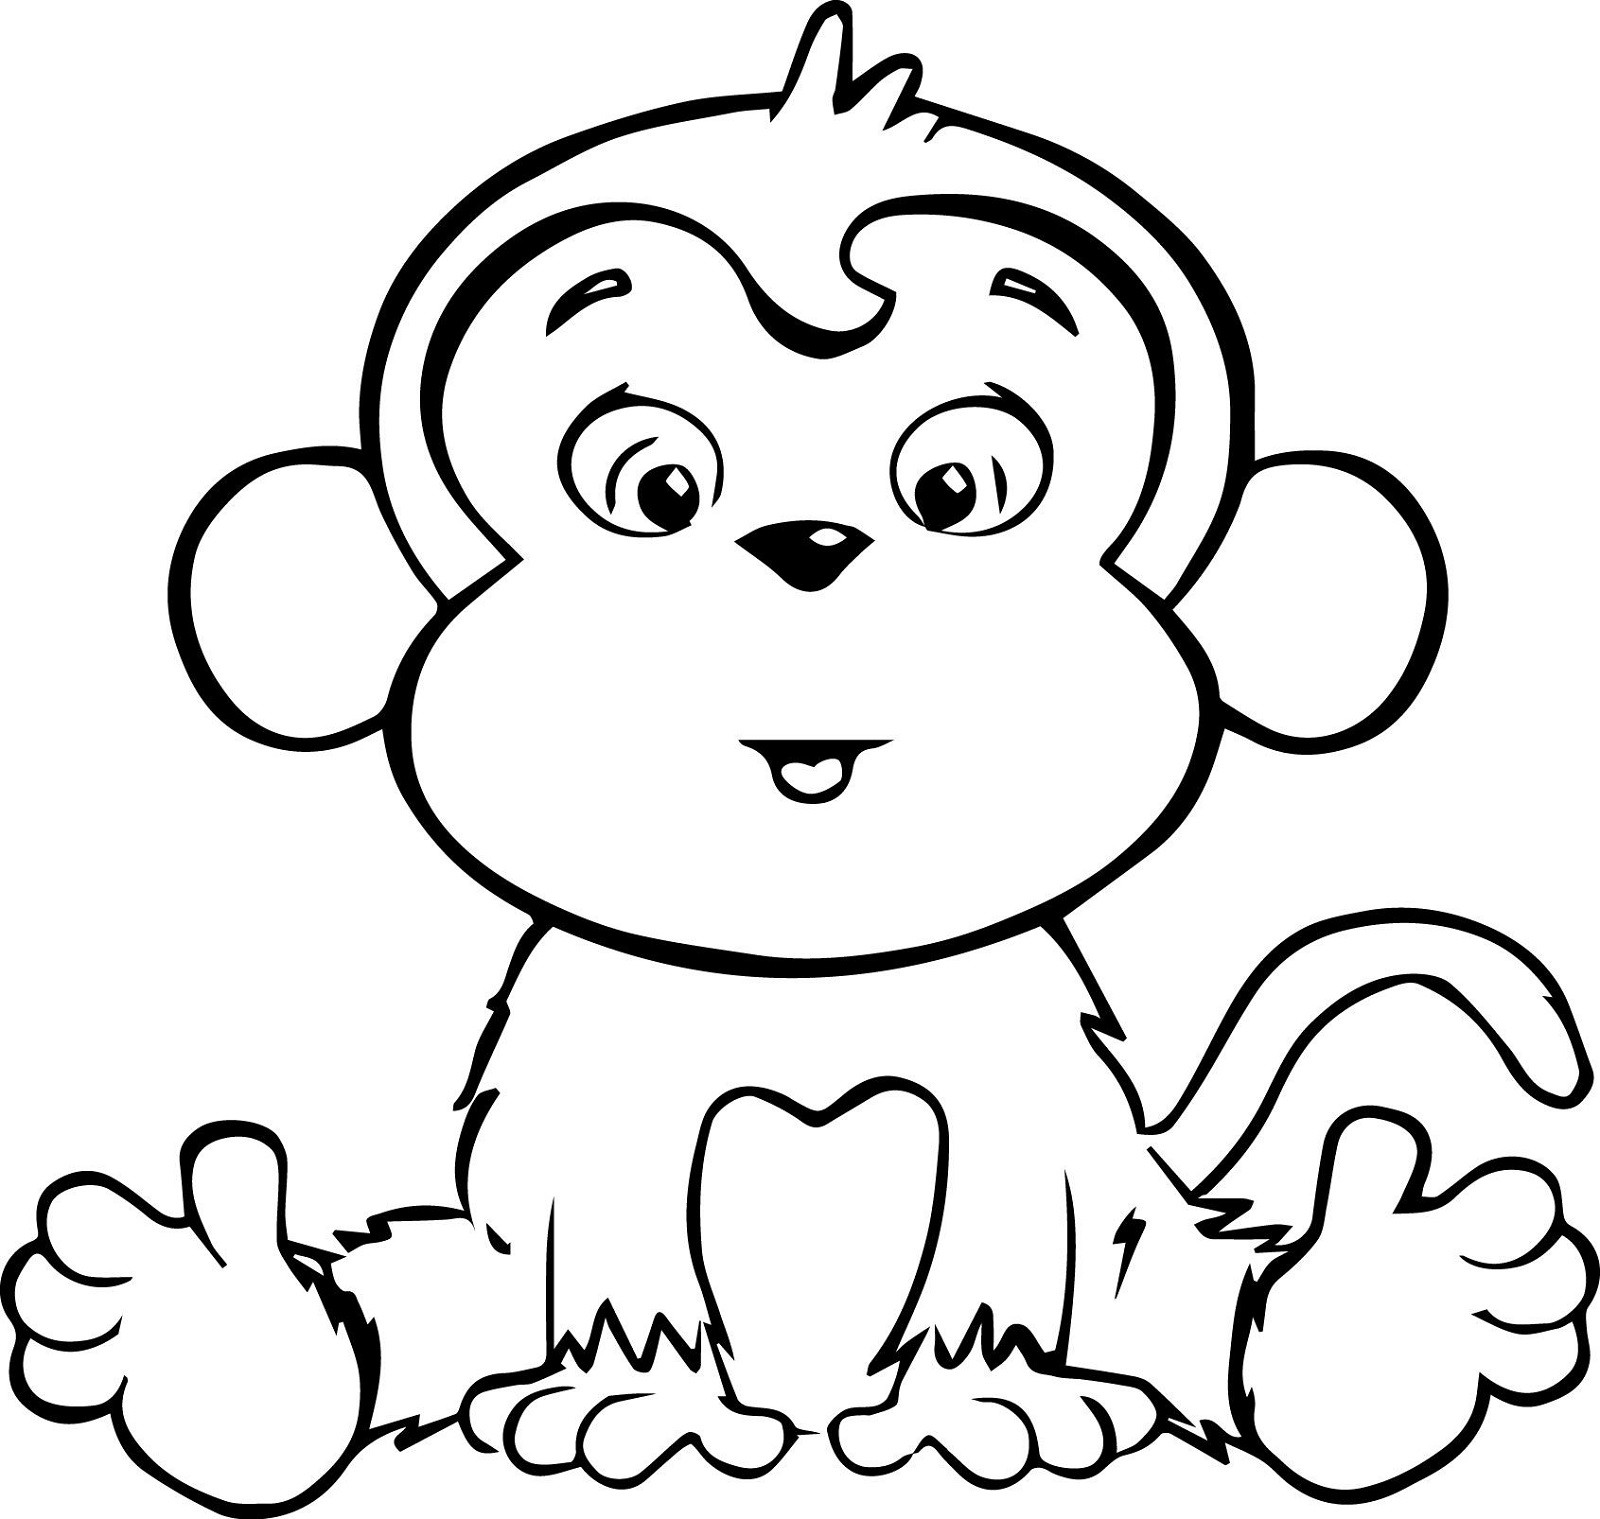 Cool Coloring Sheets For Kids (Monkey)
 Monkeys Coloring Pages Worksheets